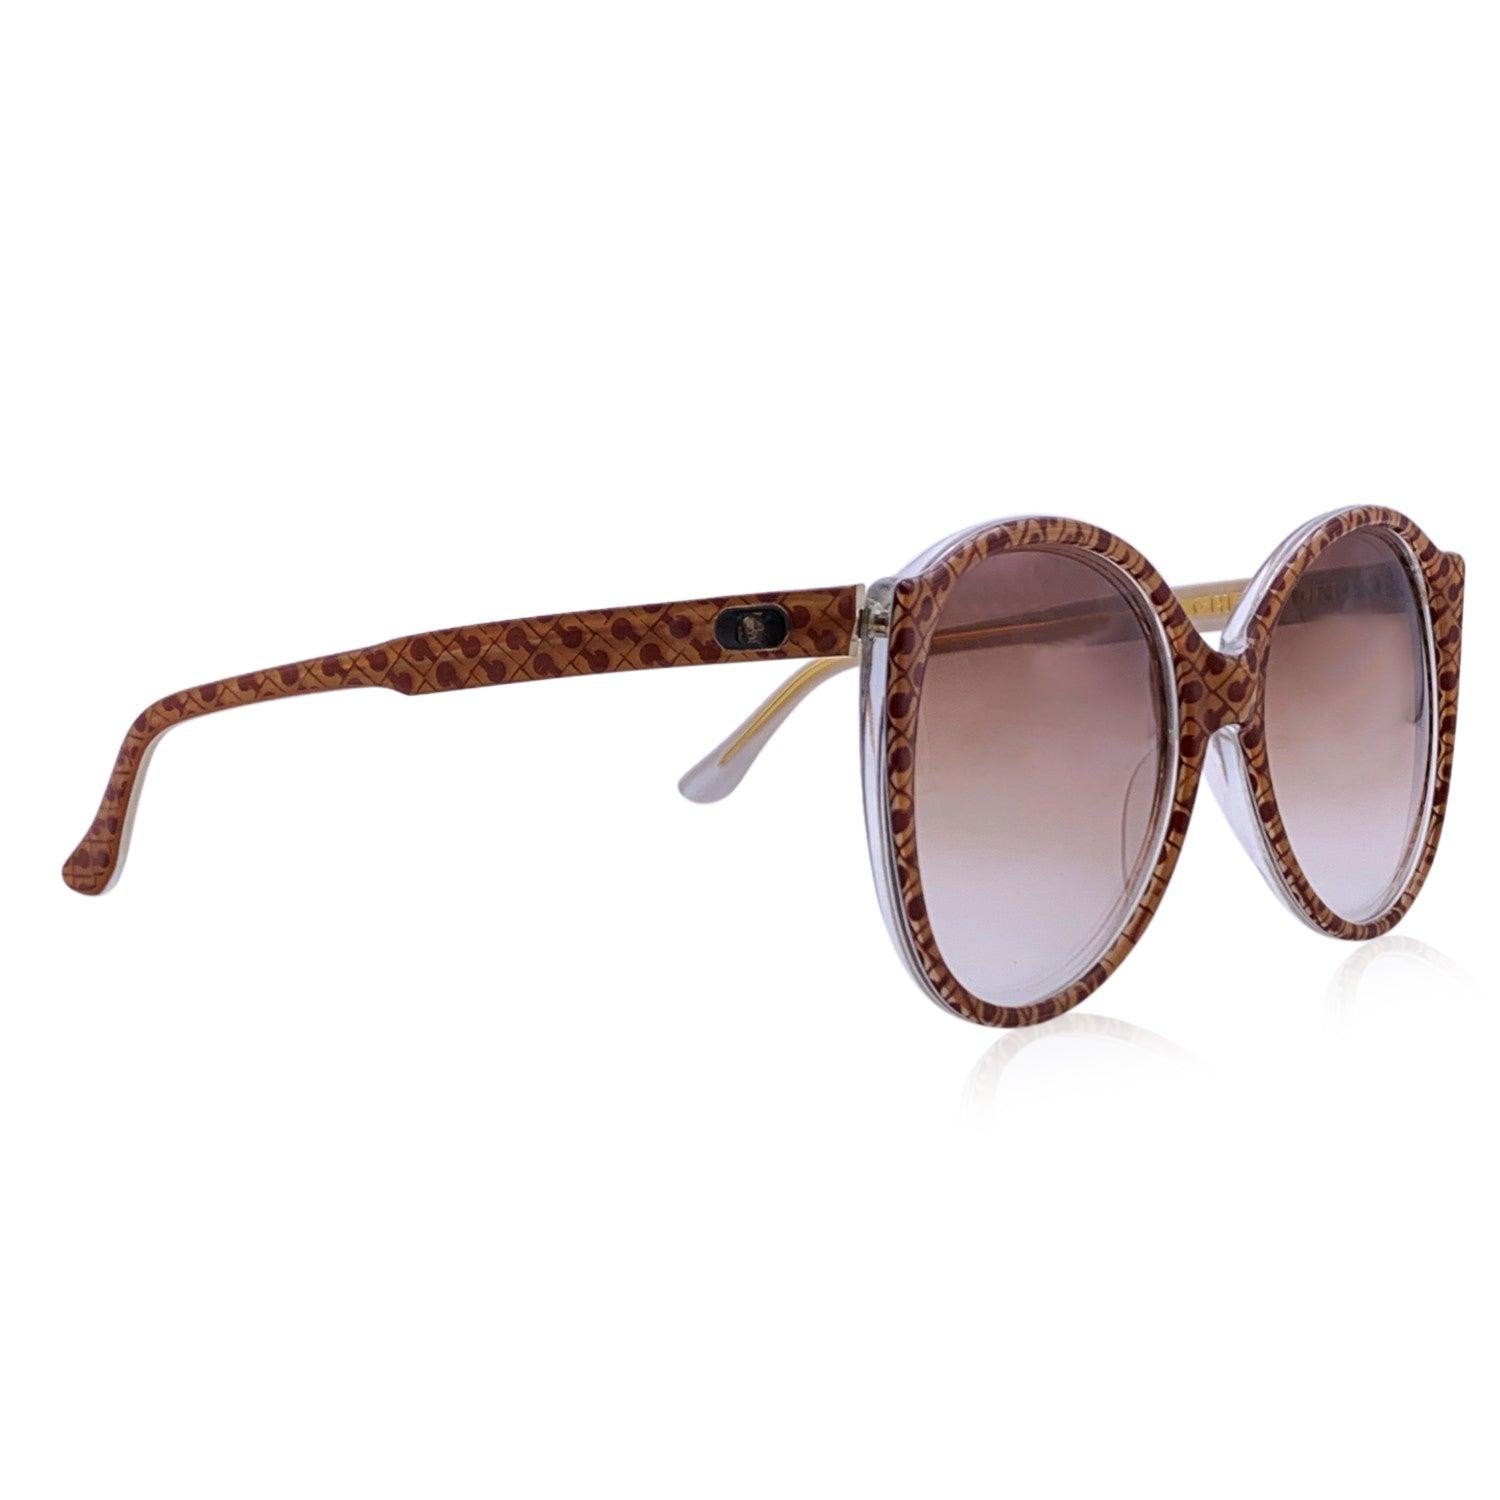 Vintage Gherardini sunglasses mod. Oro - G/17. Beige and brown acetate frame with logo pattern. Original 100% Total UVA/UVB protection in gradient brown color. Gherardini logo on temples. Made in Italy Details MATERIAL: Acetate COLOR: Brown MODEL: